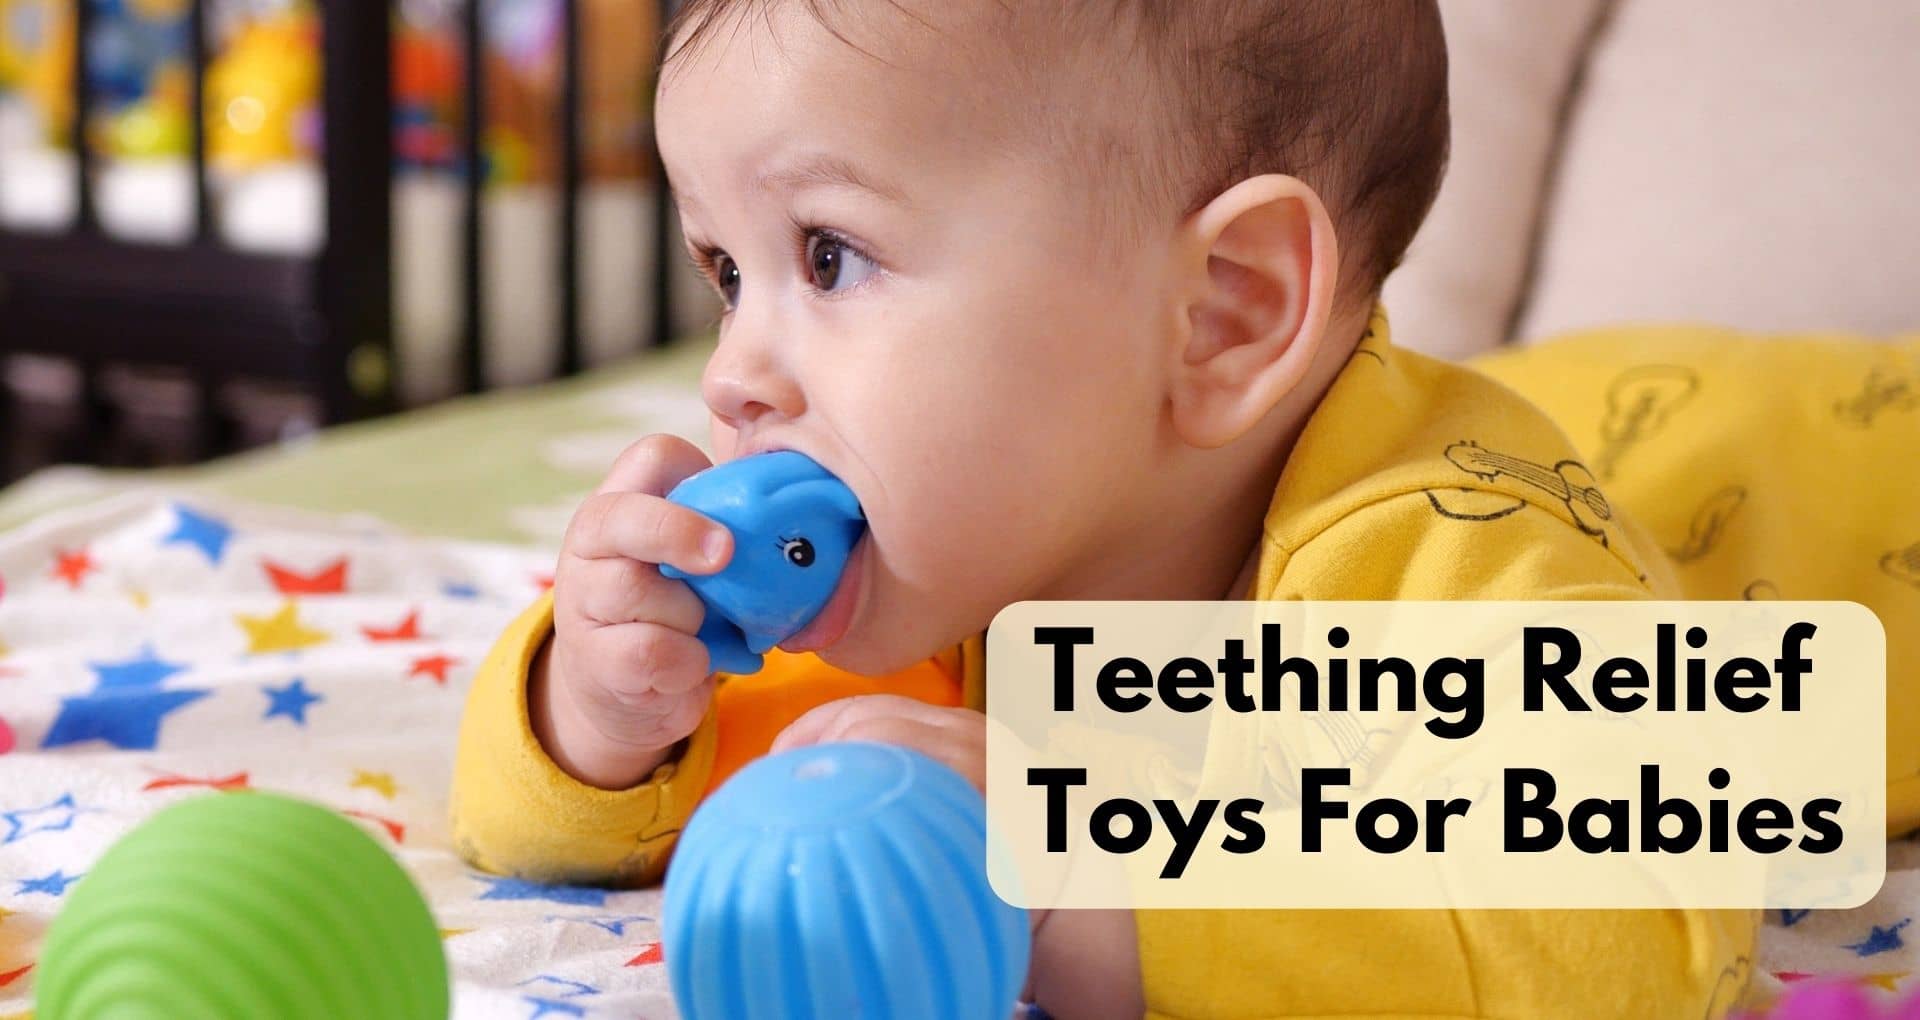 What Are Some Best Teething Toys For Babies